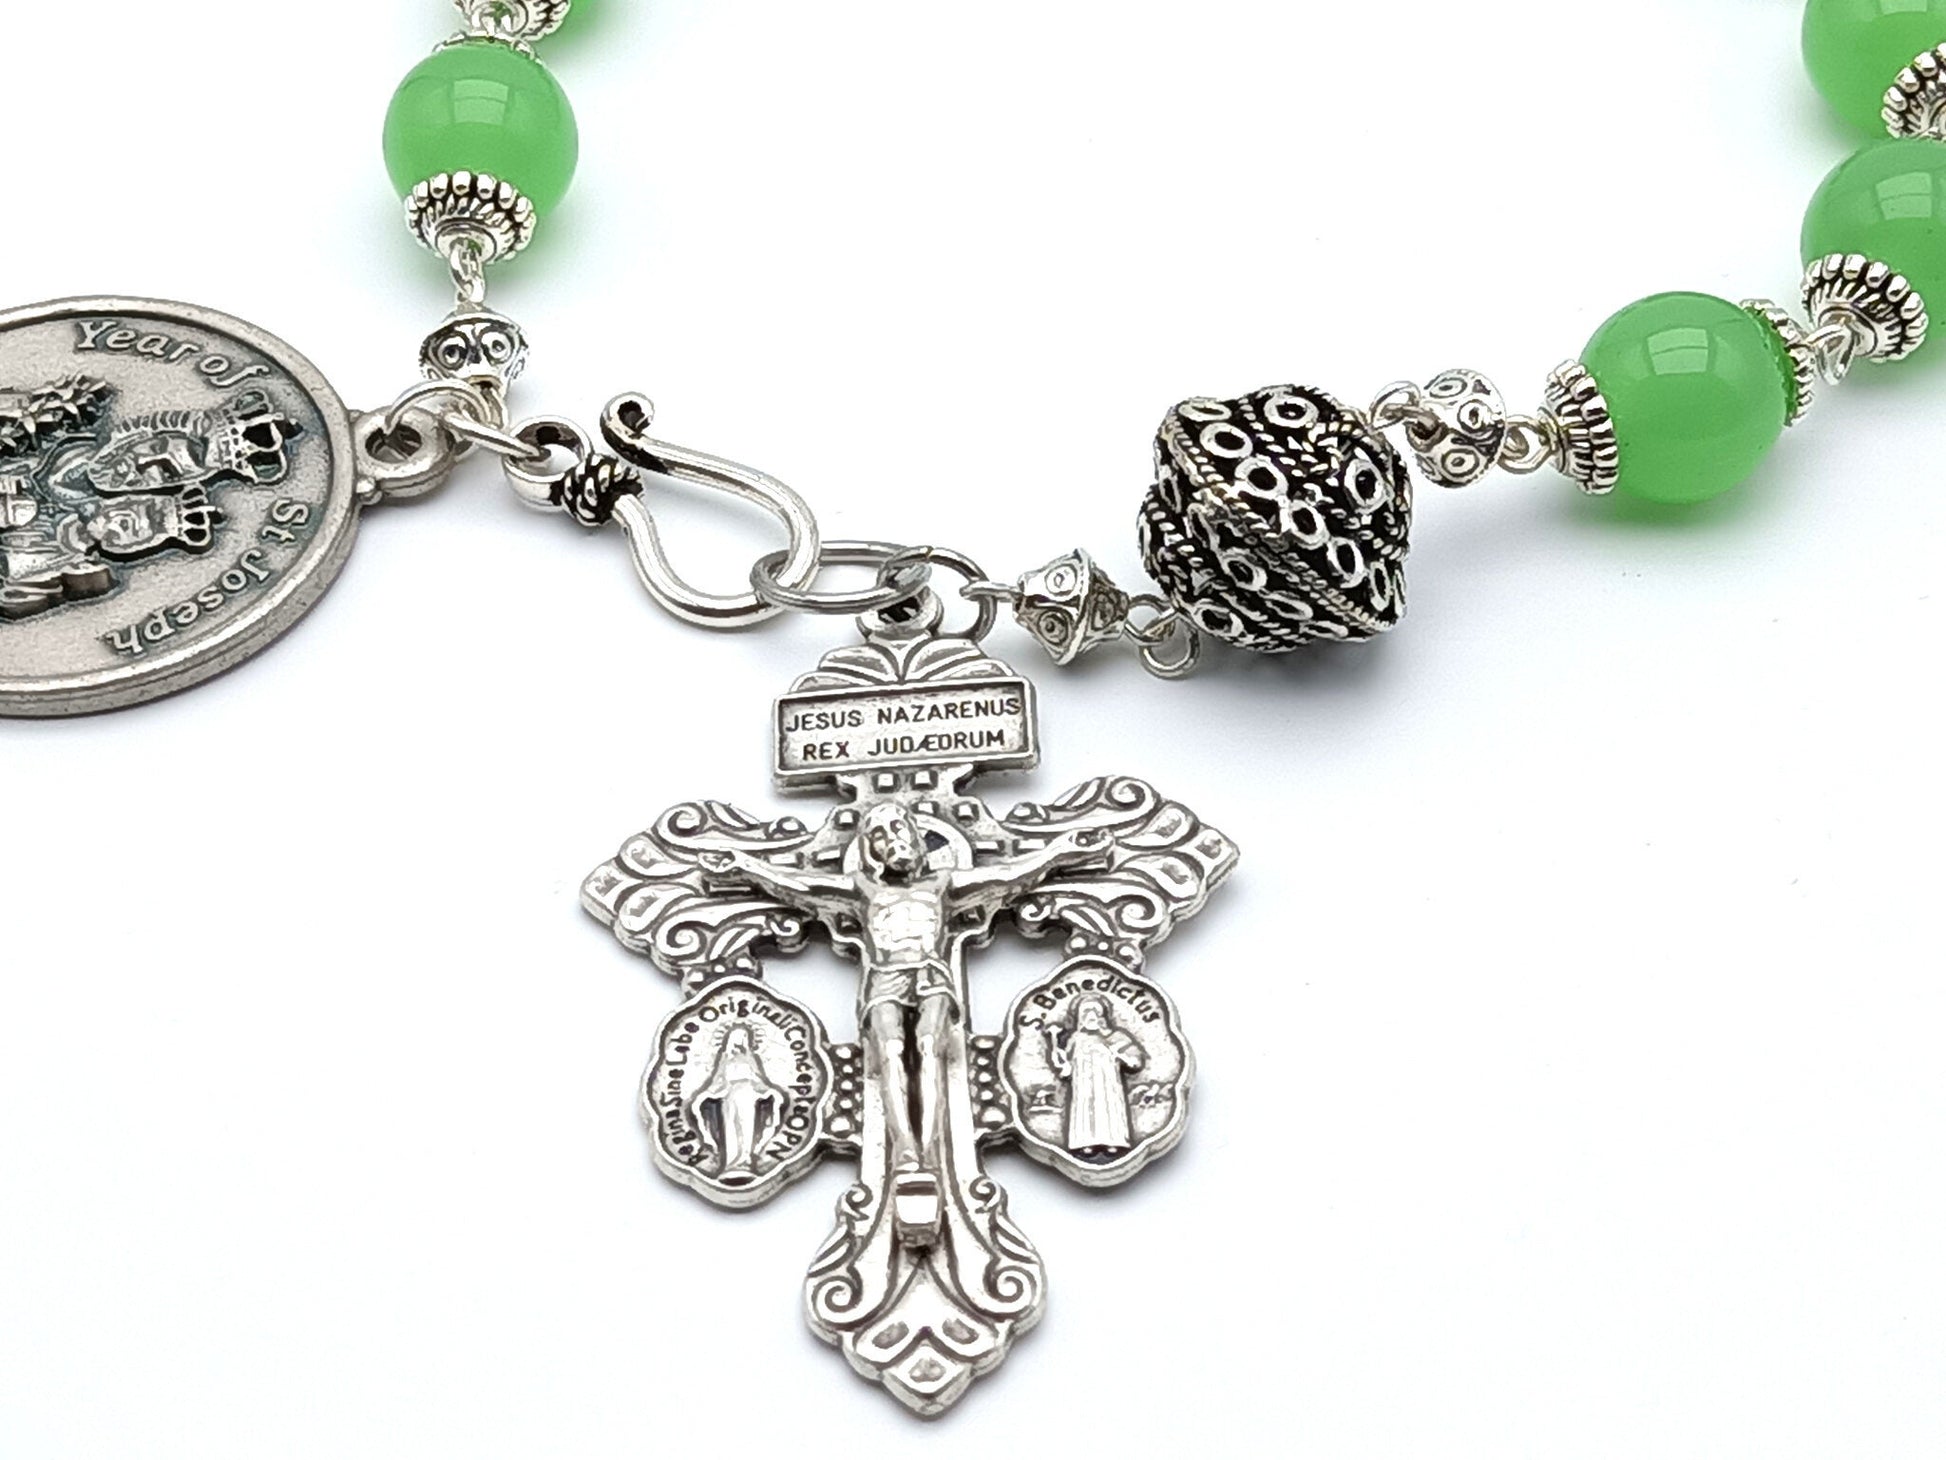 Saint Joseph unique rosary beads single decade or tenner rosary with green glass beads, silver bead caps, pater bead, pardon crucifix and Year of Saint Joseph medal.